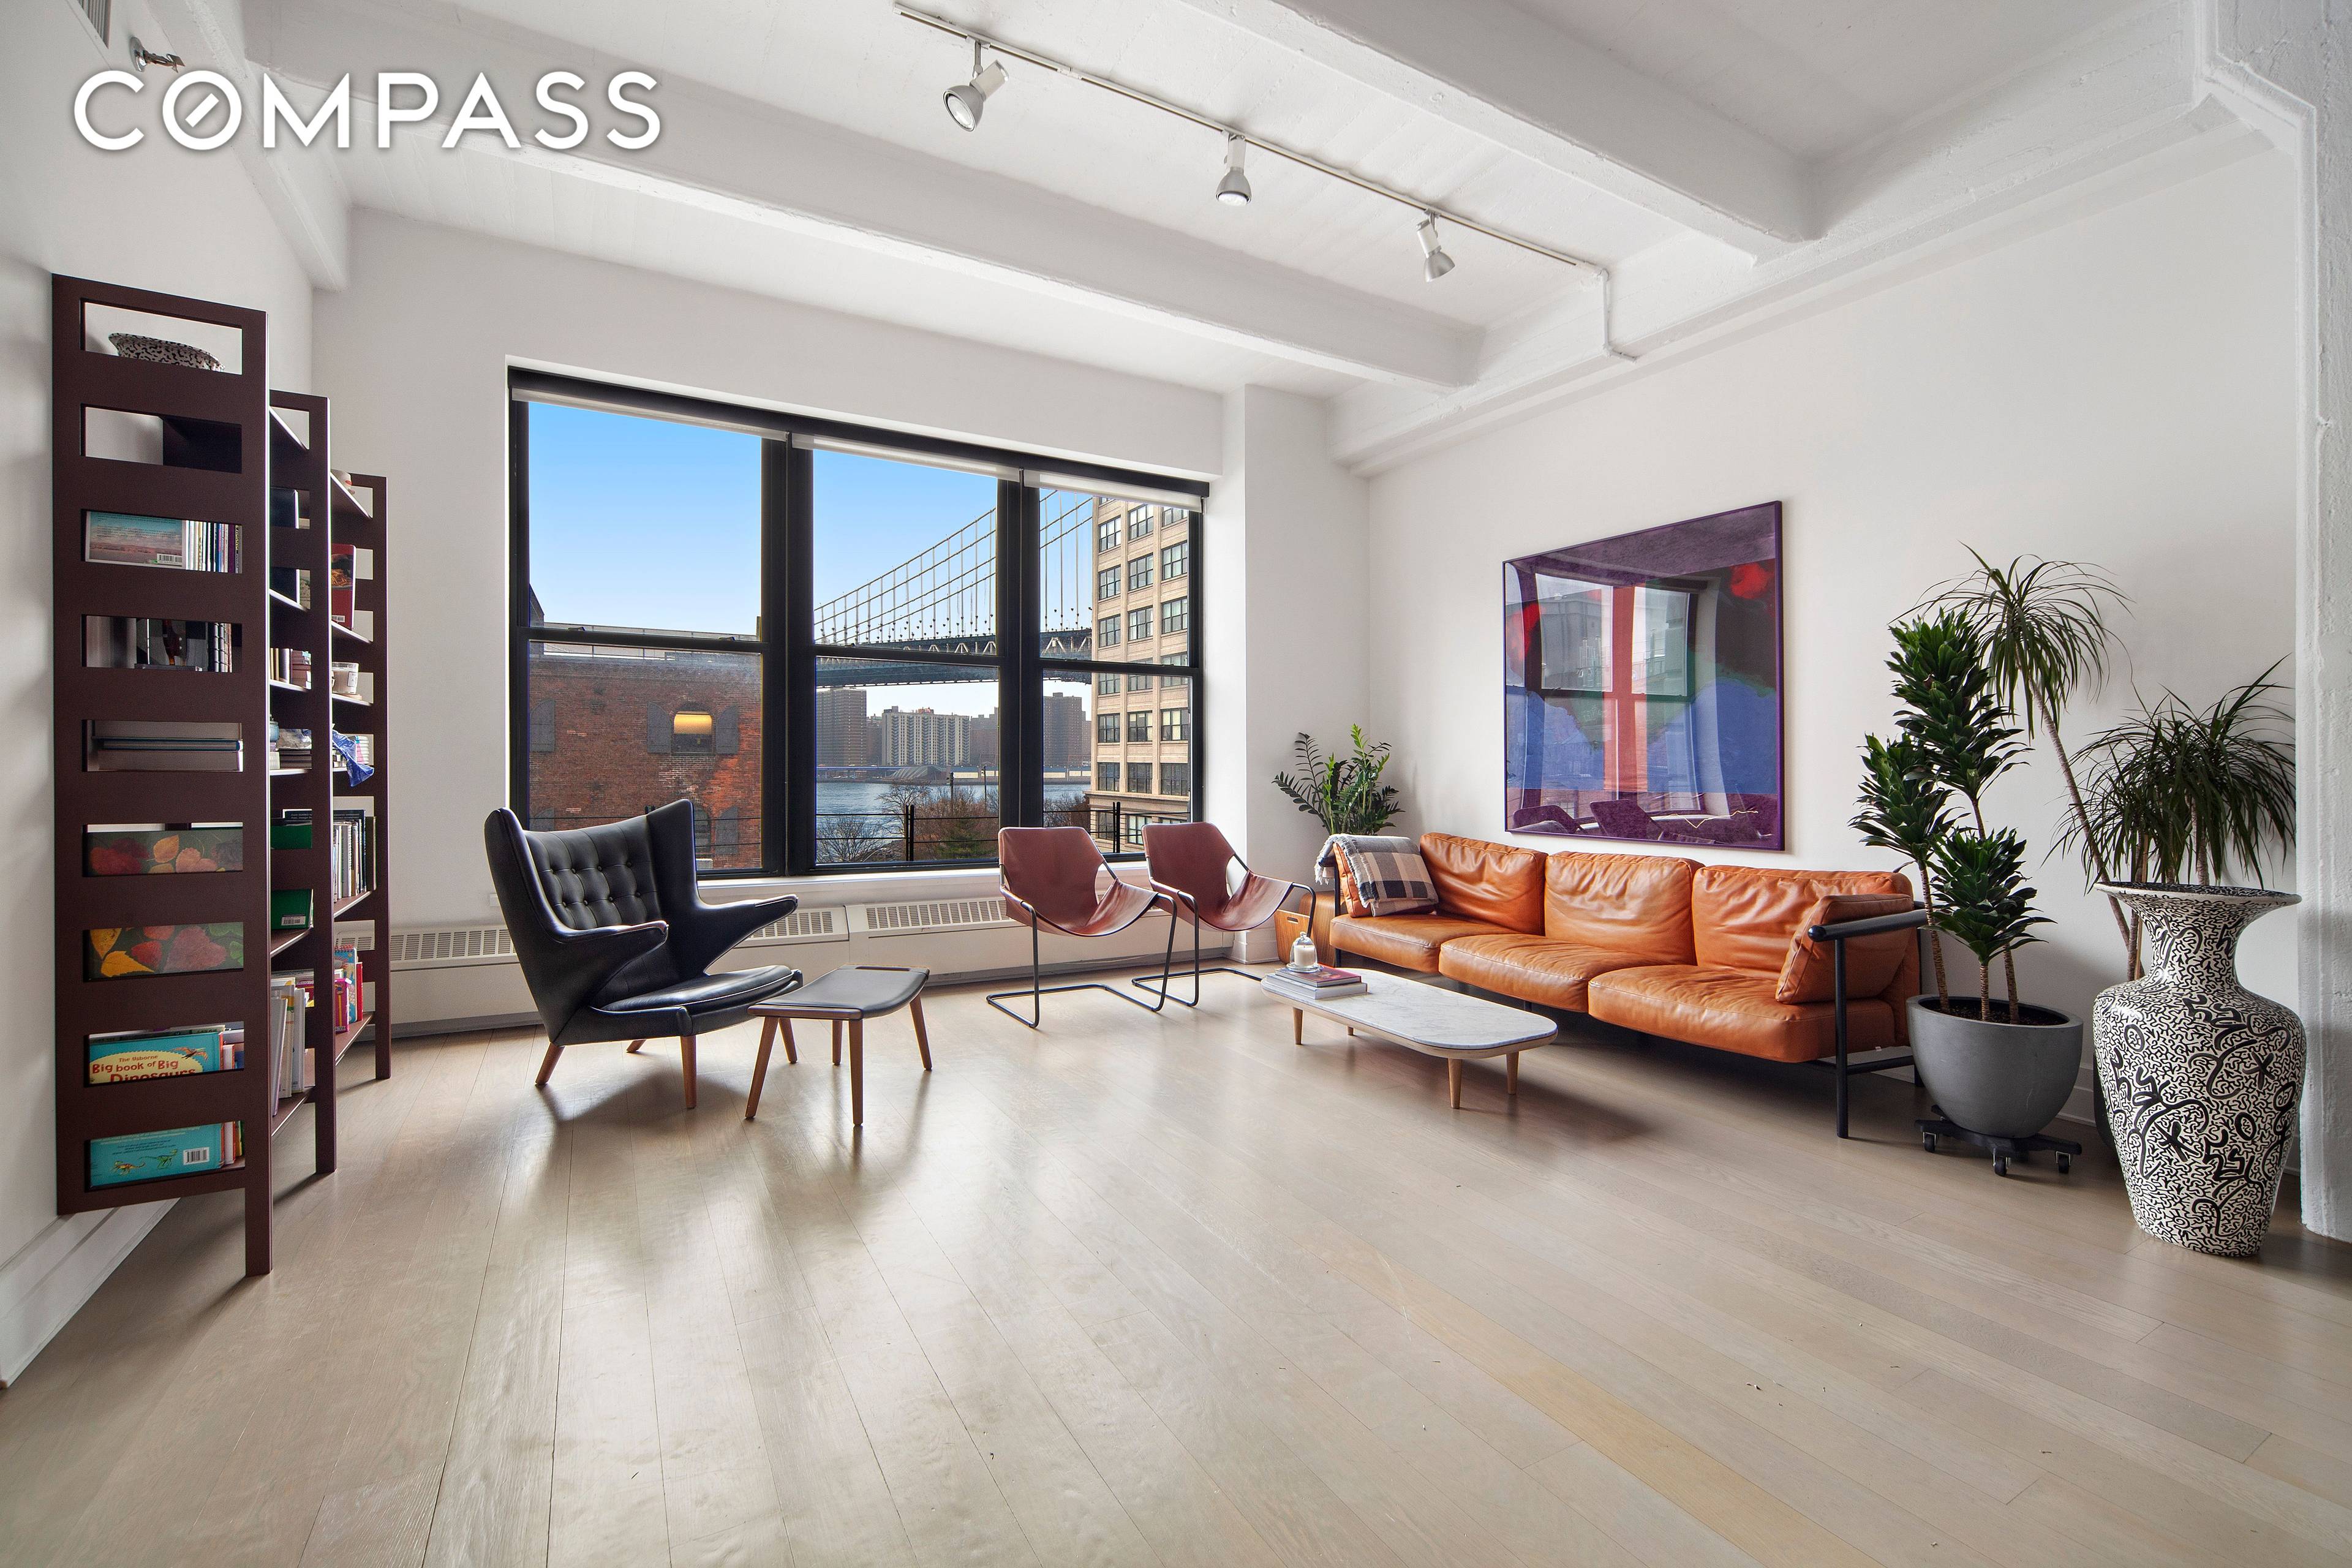 Embrace quintessential Dumbo loft living in this bright and airy home featuring picture postcard views, a stunning renovation, new six inch oak flooring, a conversion to two full baths and ...